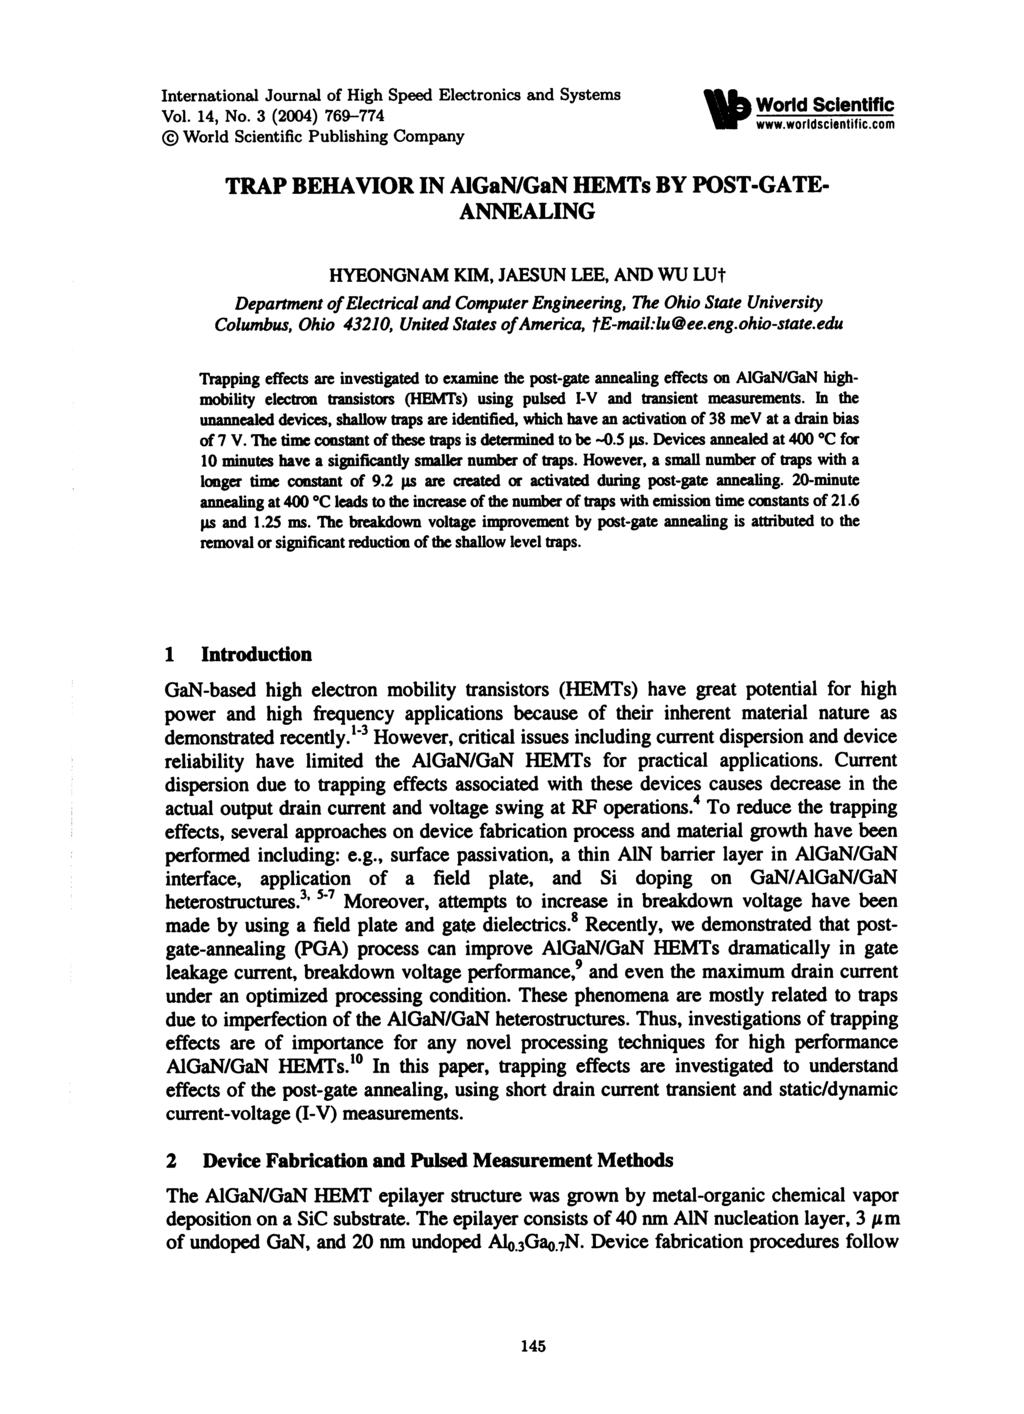 International Journal of High Speed Electronics and Systems Vol. 14, No. 3 (2004) 769774 ( World Scientific Publishing Company World Scientific wwwworldscientific.